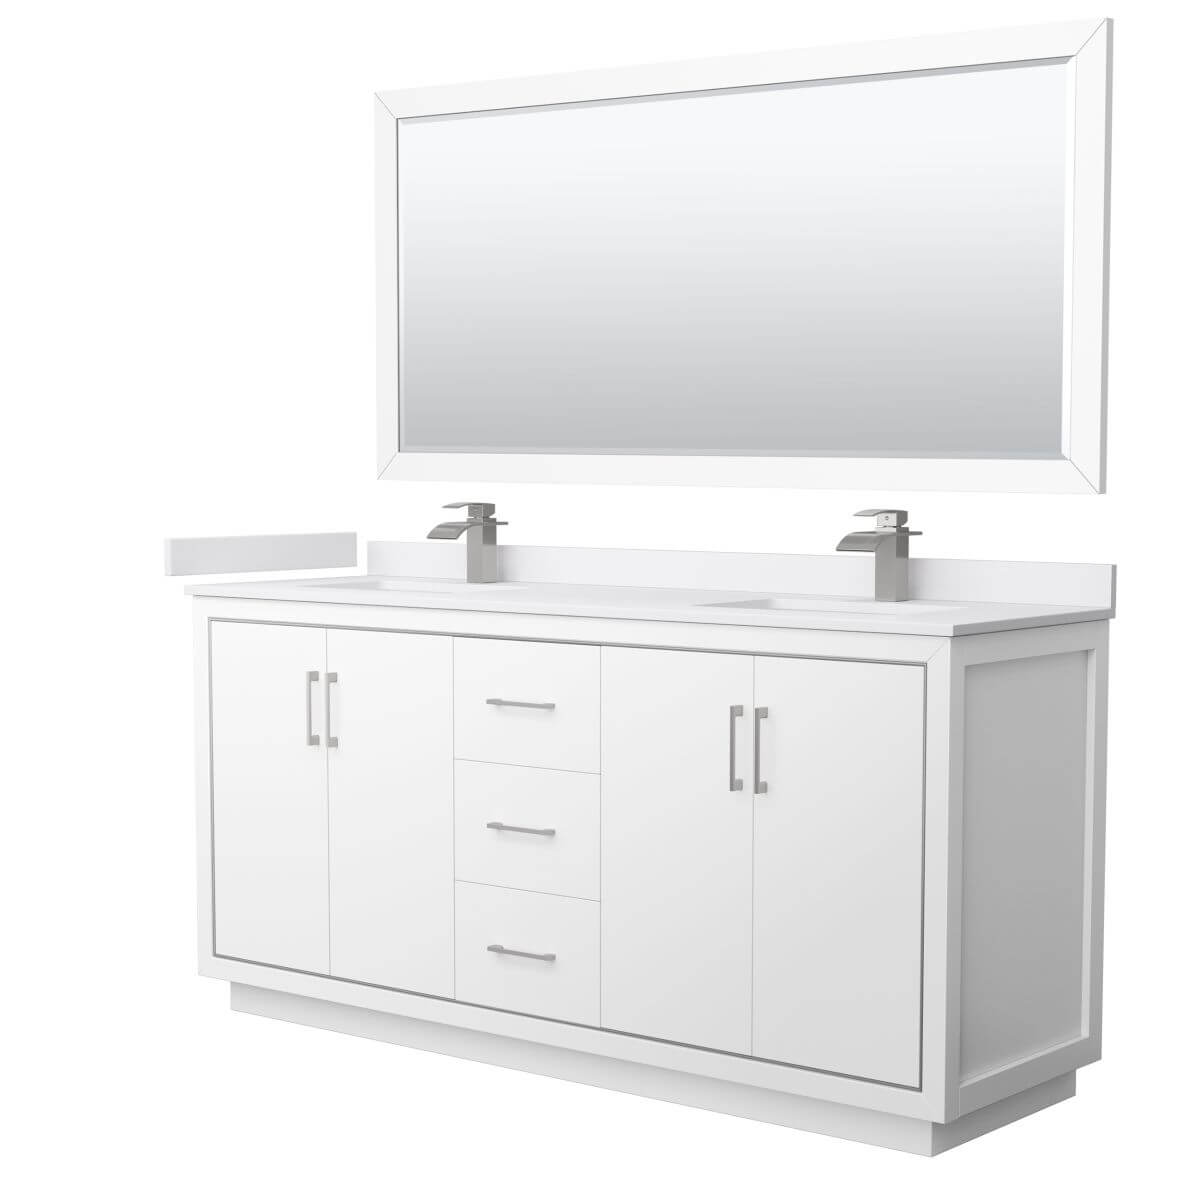 Wyndham Collection WCF111172DWHWCUNSM70 Icon 72 inch Double Bathroom Vanity in White with White Cultured Marble Countertop, Undermount Square Sinks, Brushed Nickel Trim and 70 Inch Mirror